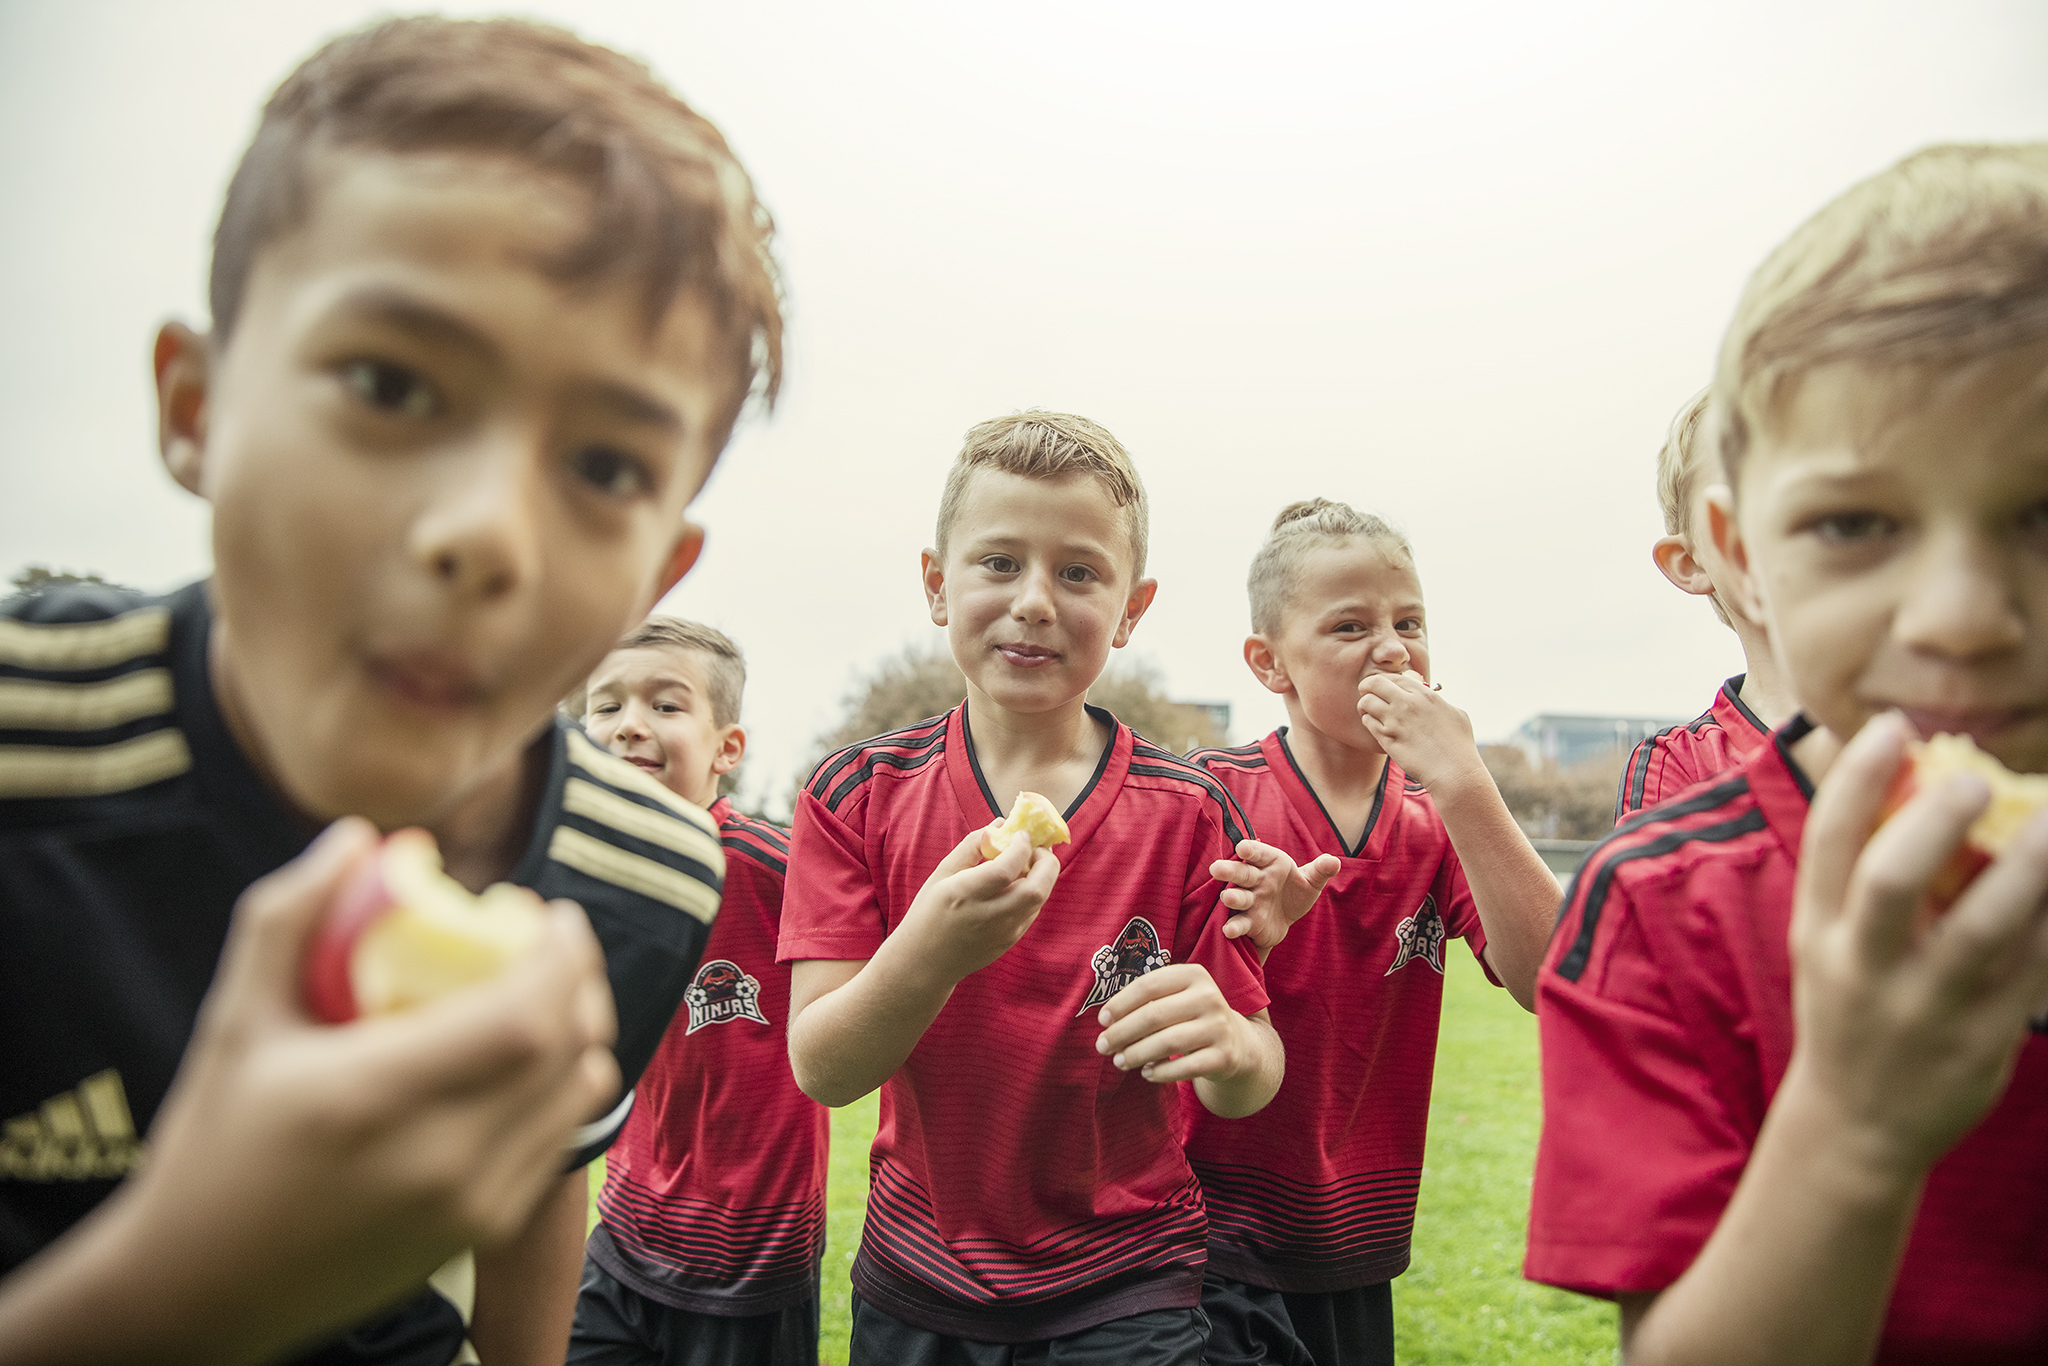 Six young boys eating Rockit apples after football game